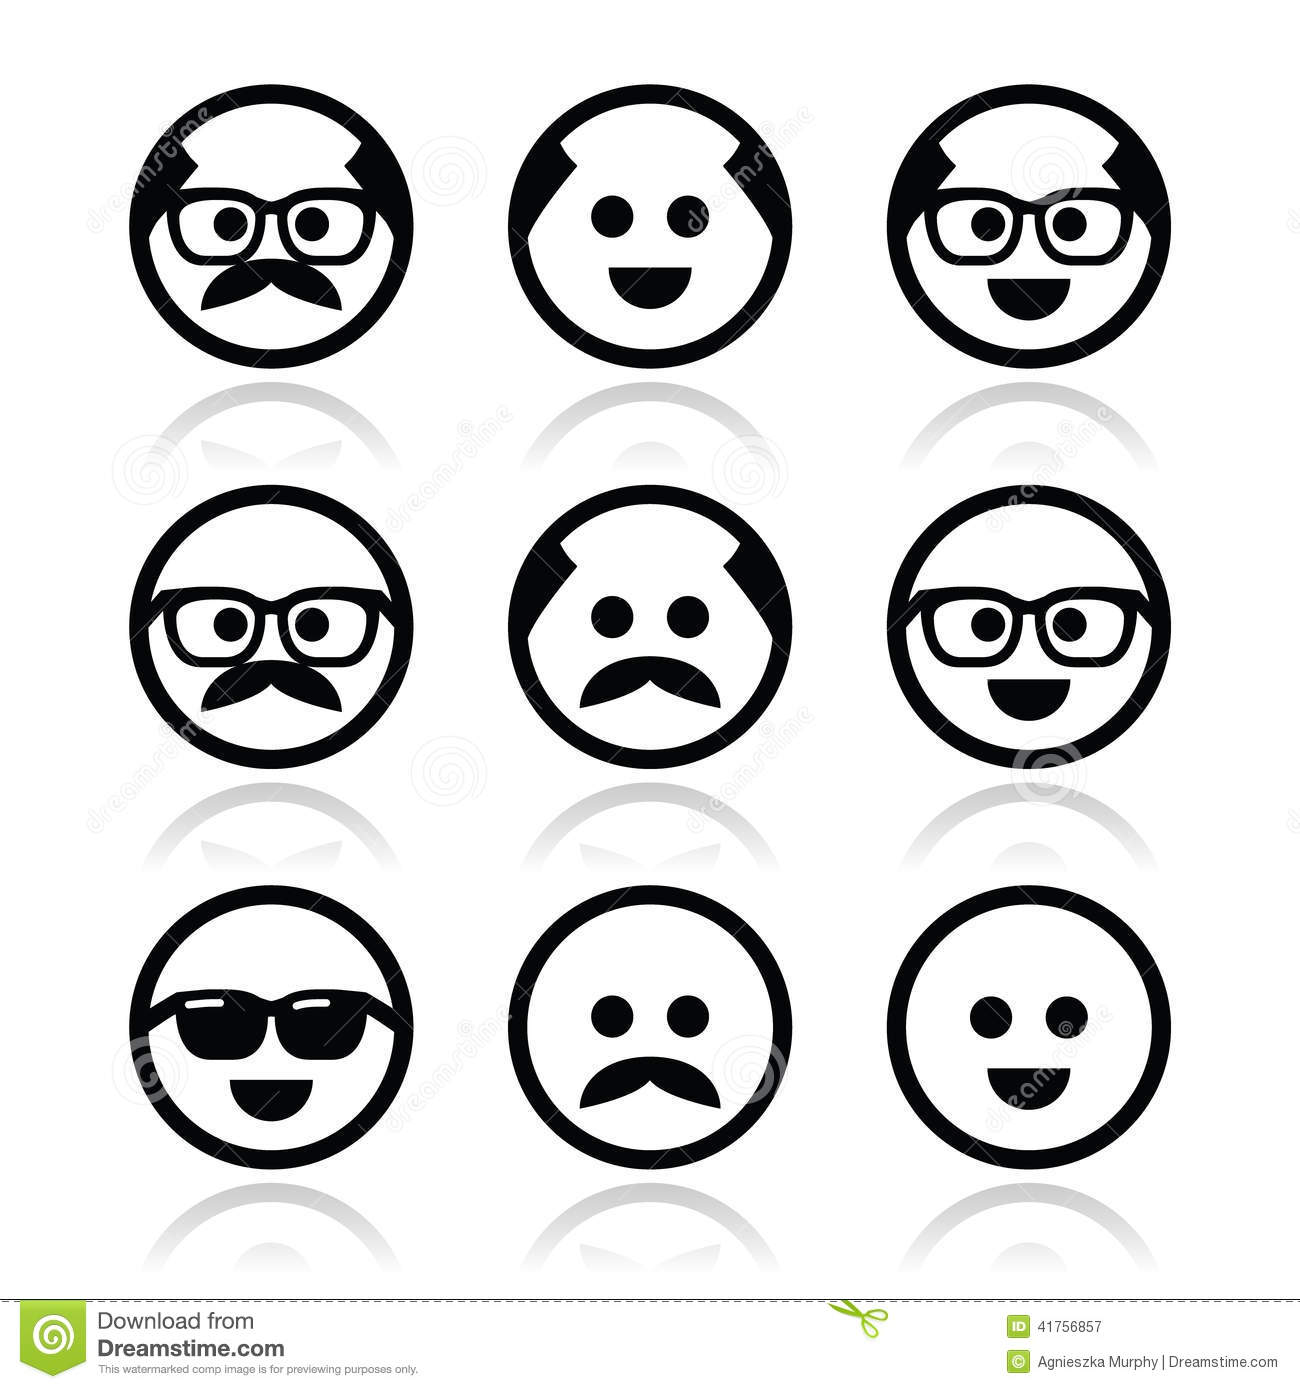 Bald Man with Glasses and Mustache Icons